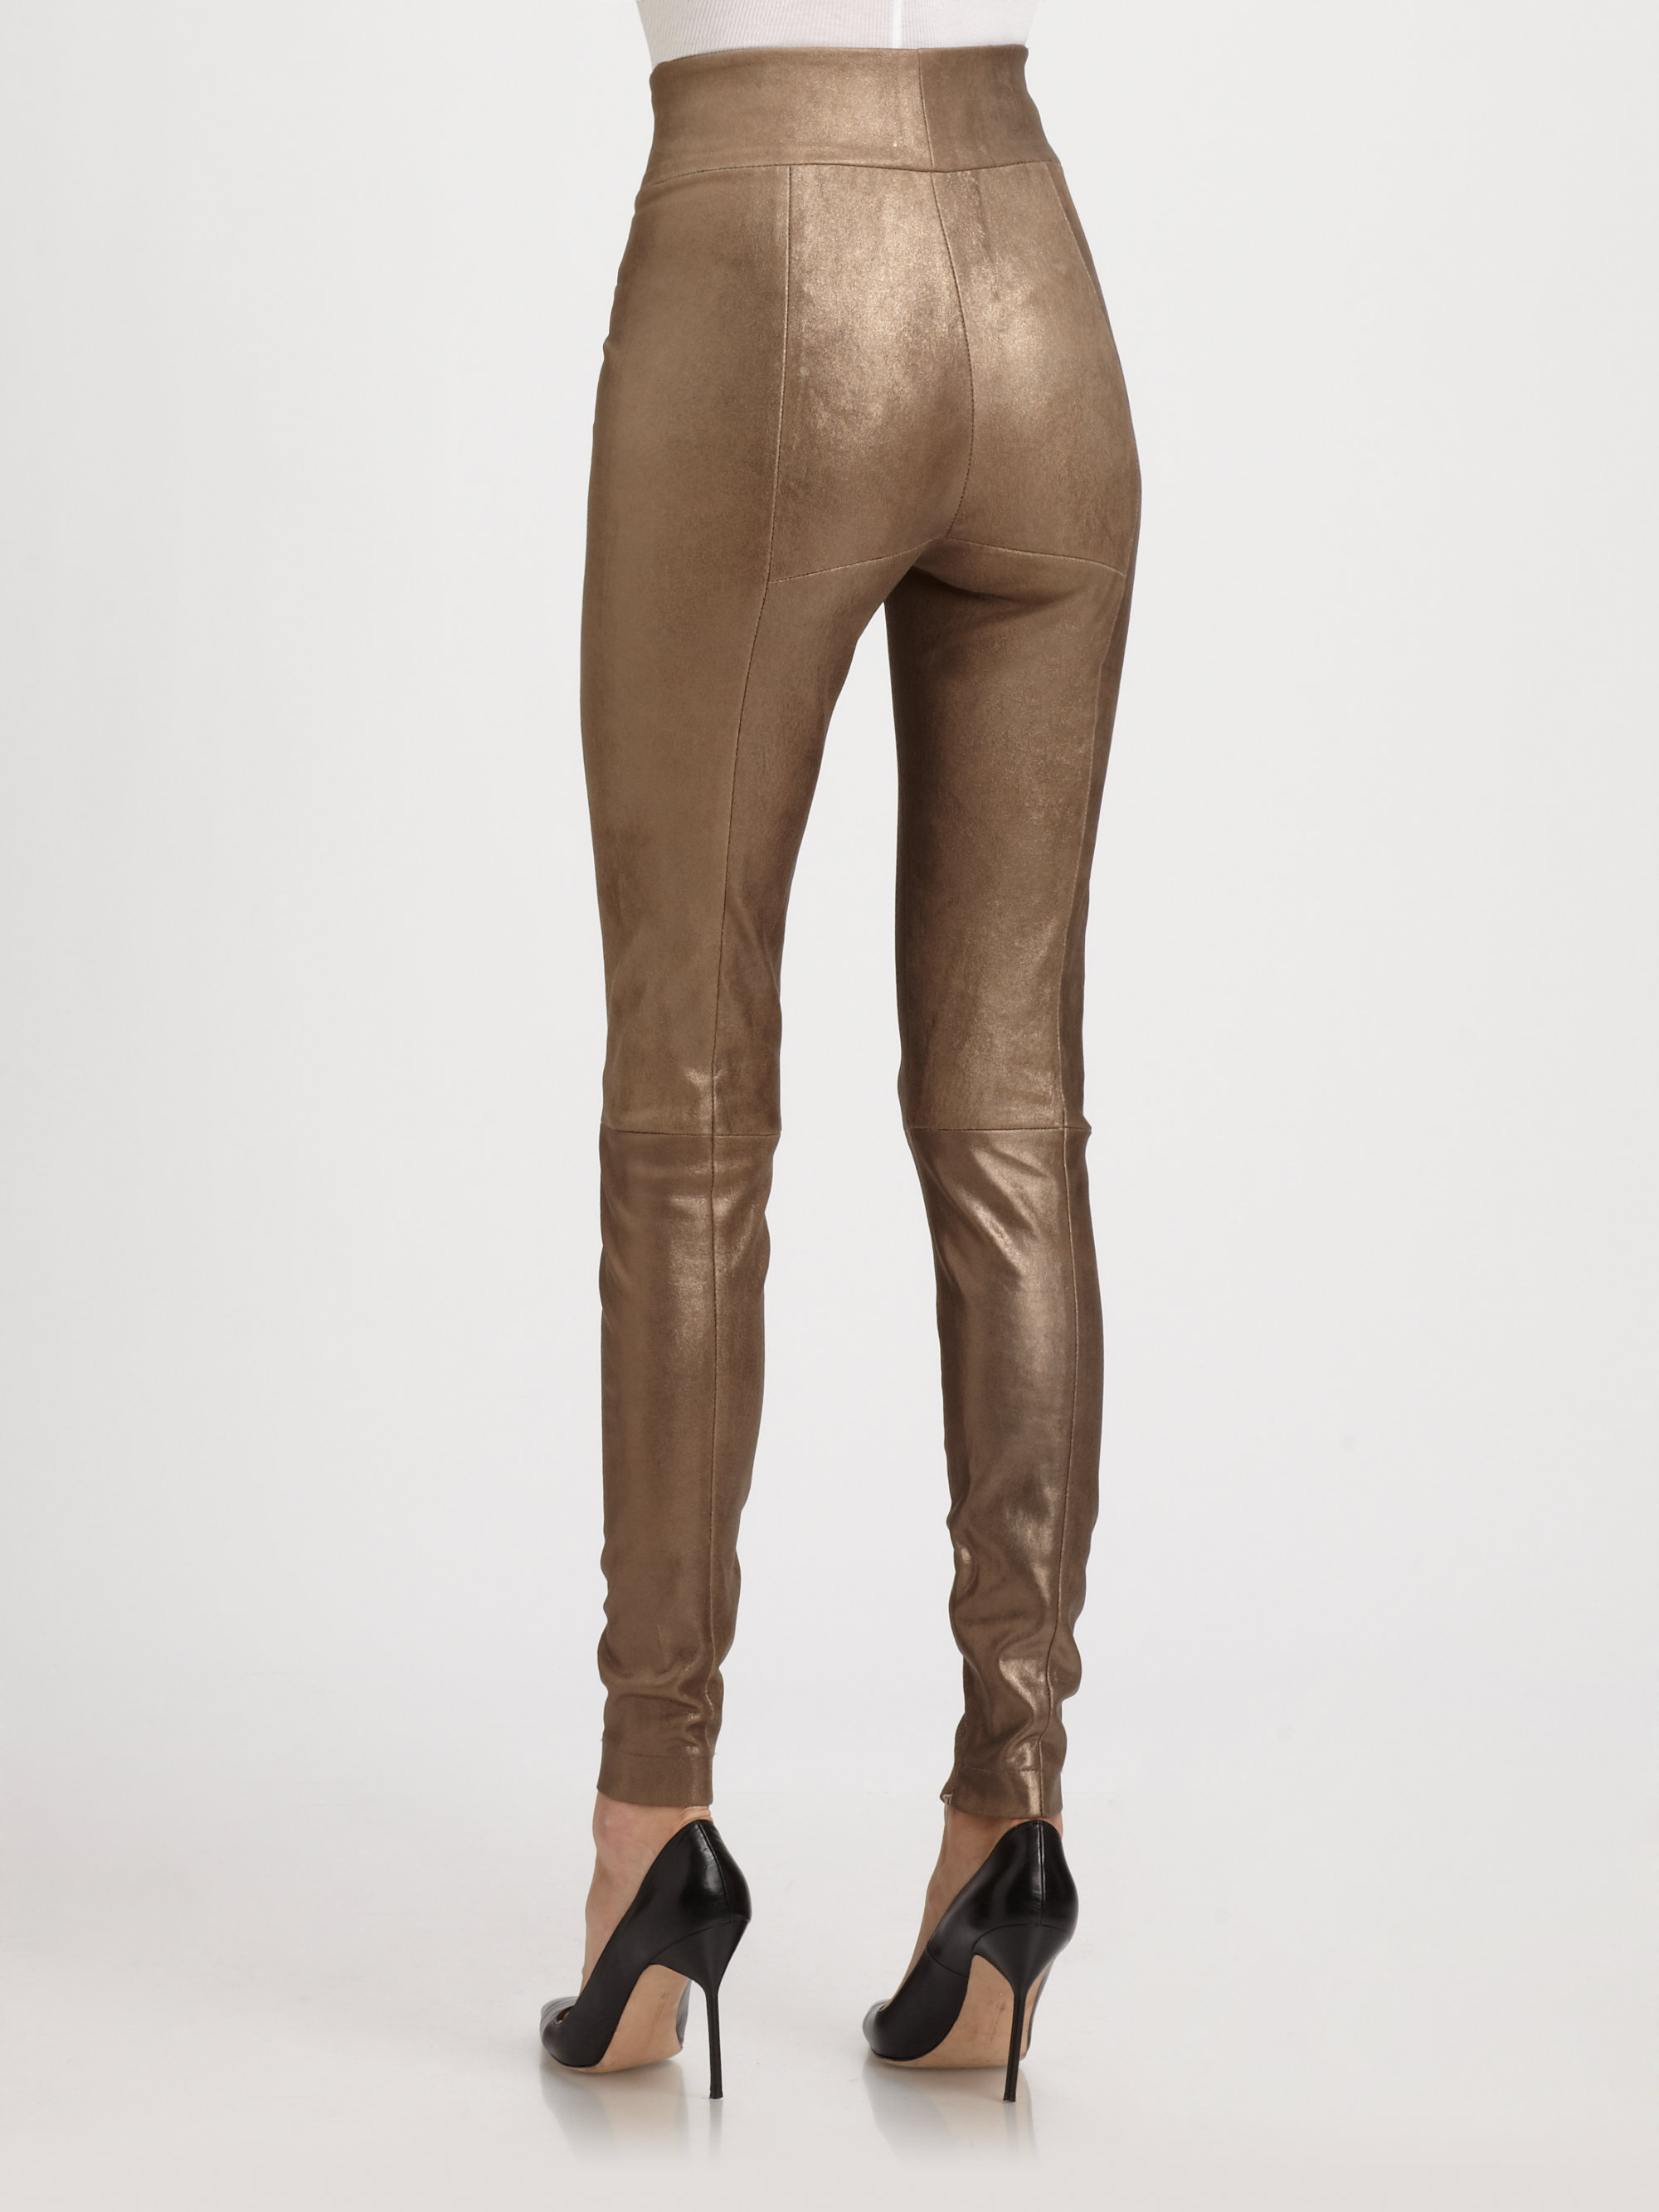 Brown Leather Leggings Uk  International Society of Precision Agriculture